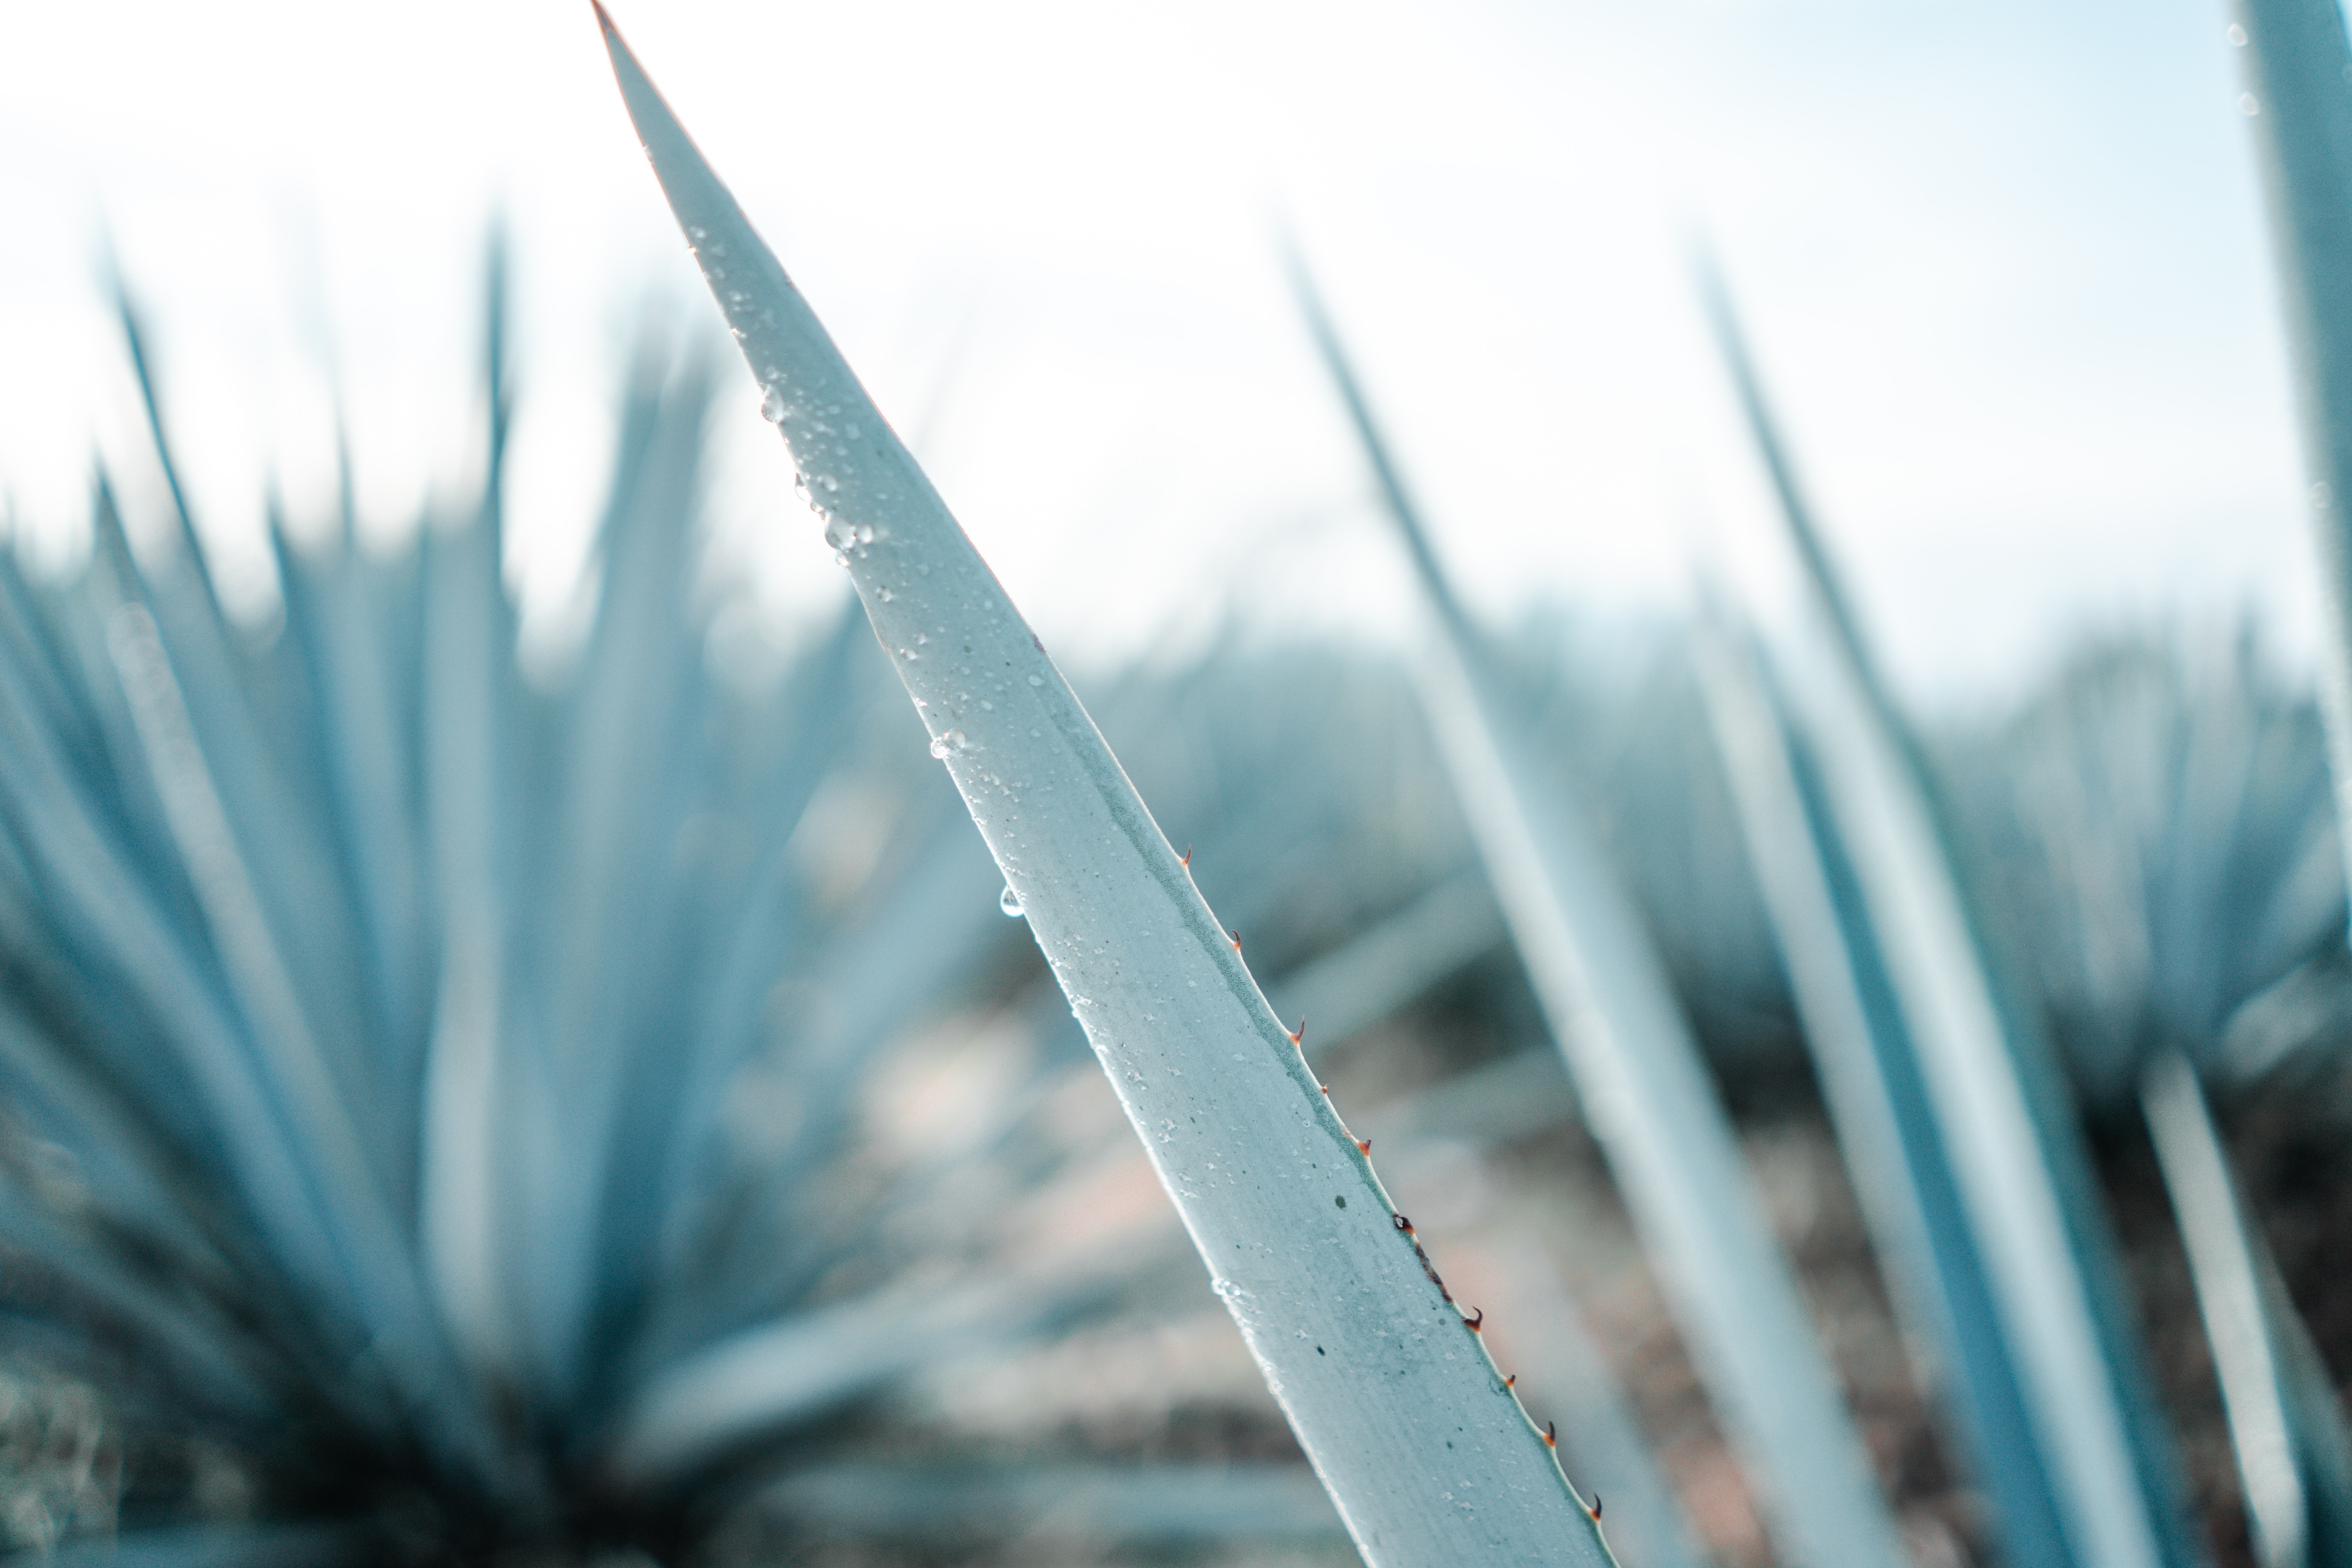 Field of blue agave plants in Mexico for tequila distilling